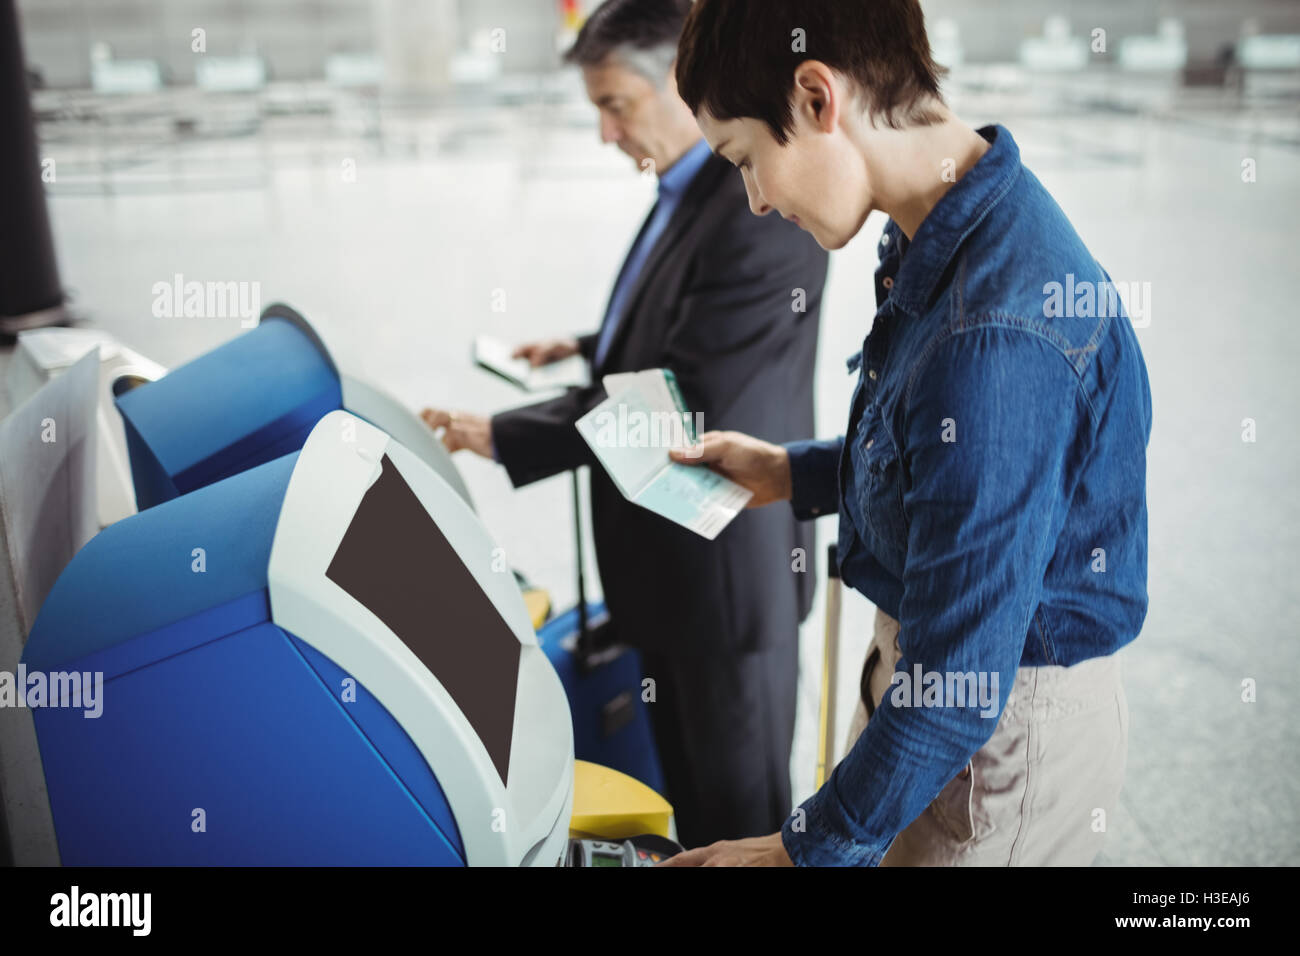 Business people using self service check-in machine Stock Photo